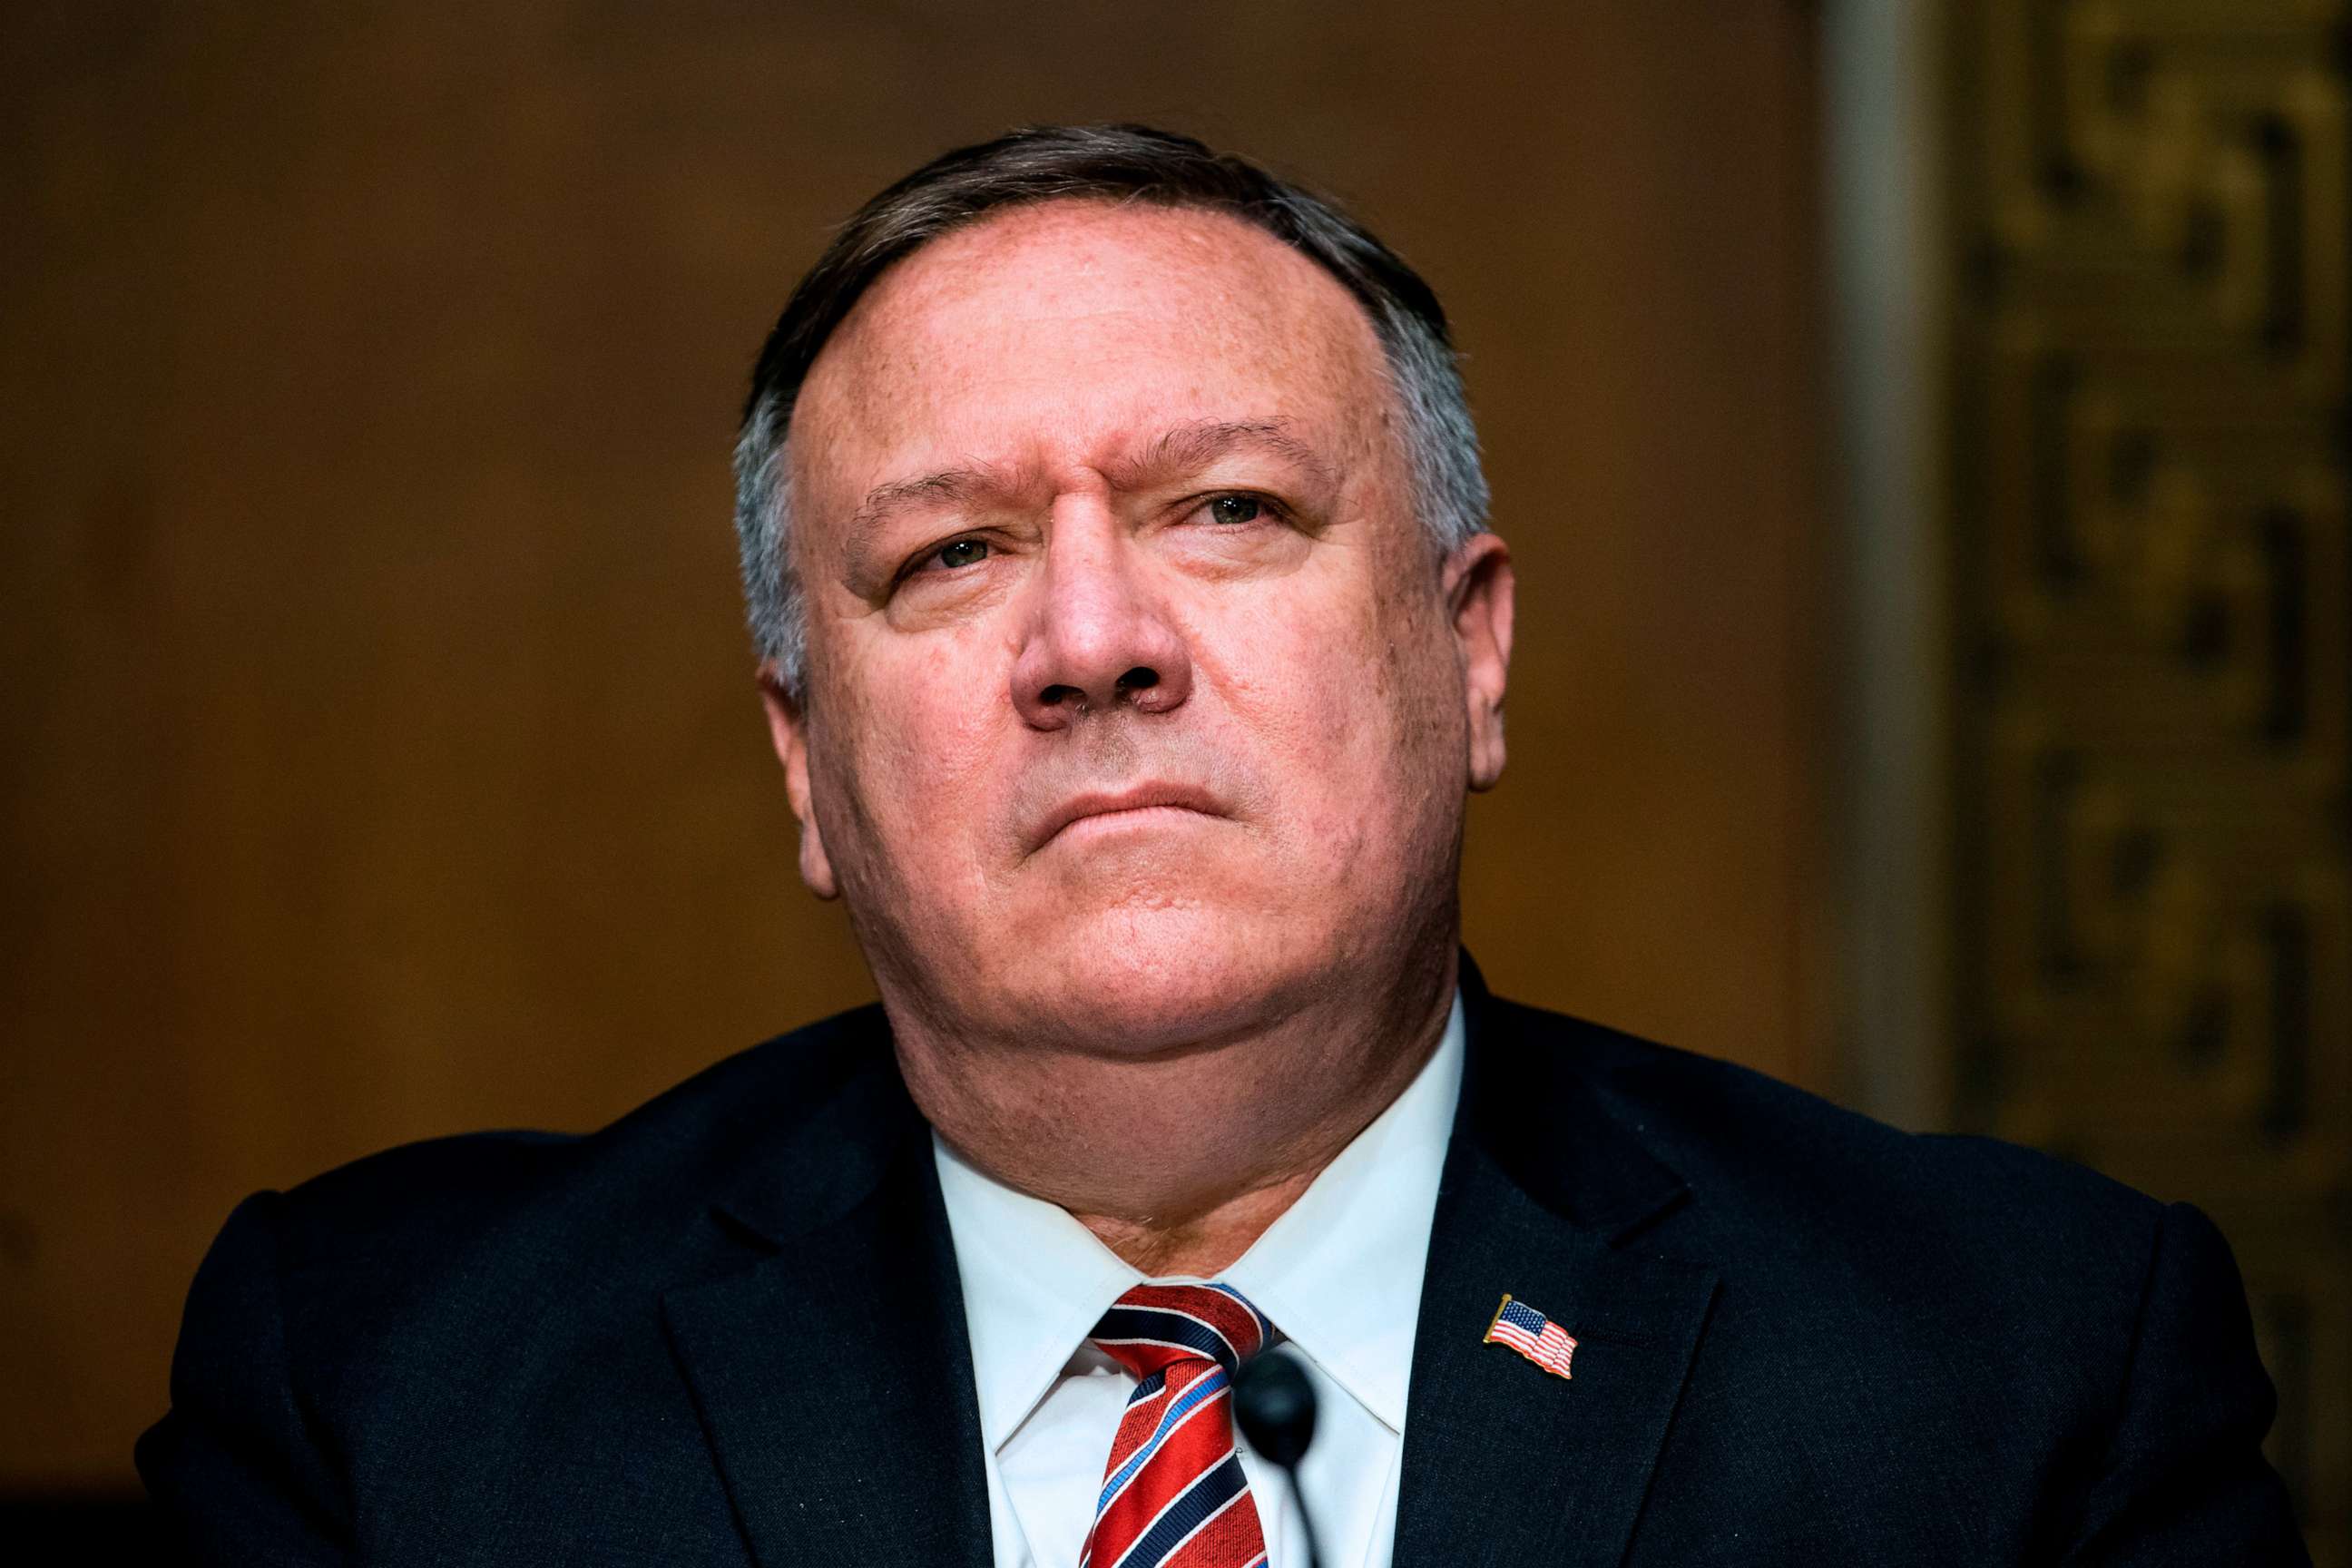 PHOTO: Secretary of State Michael Pompeo prepares to testify before a Senate Foreign Relations committee hearing on the State Departments 2021 budget in the Dirksen Senate Office Building in Washington, D.C., on July 30, 2020.